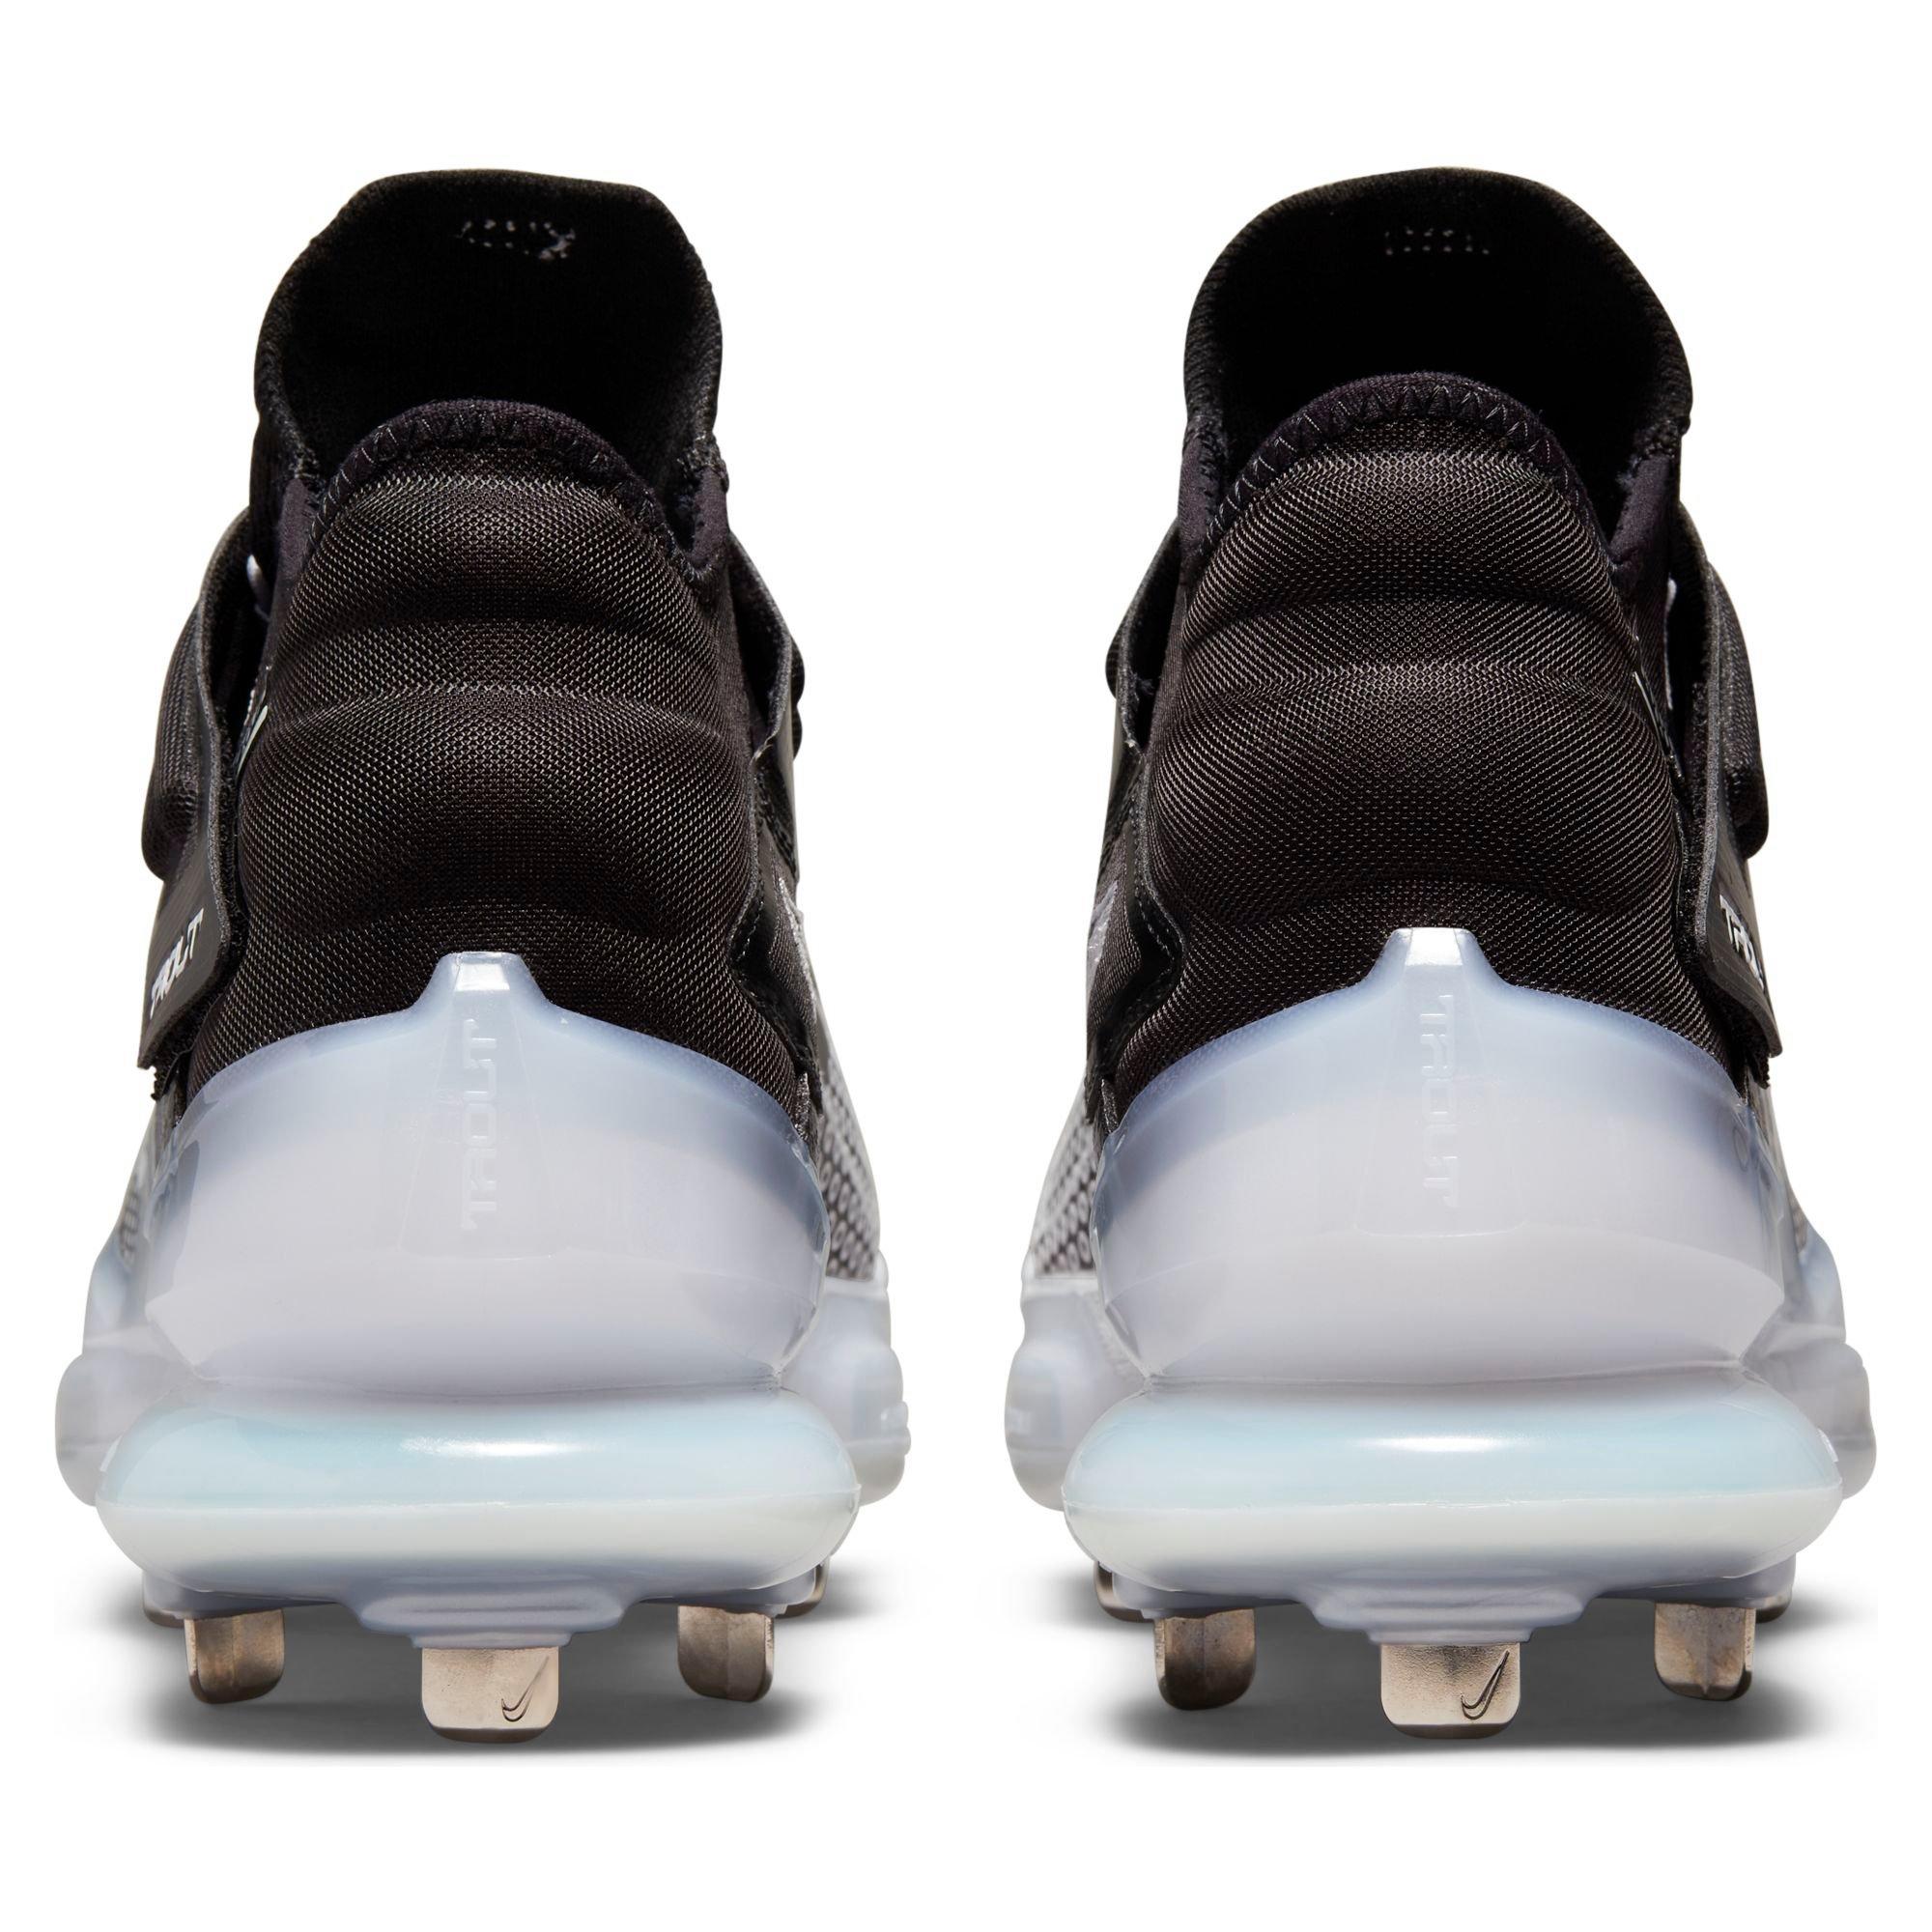 rainbow trout mike trout cleats